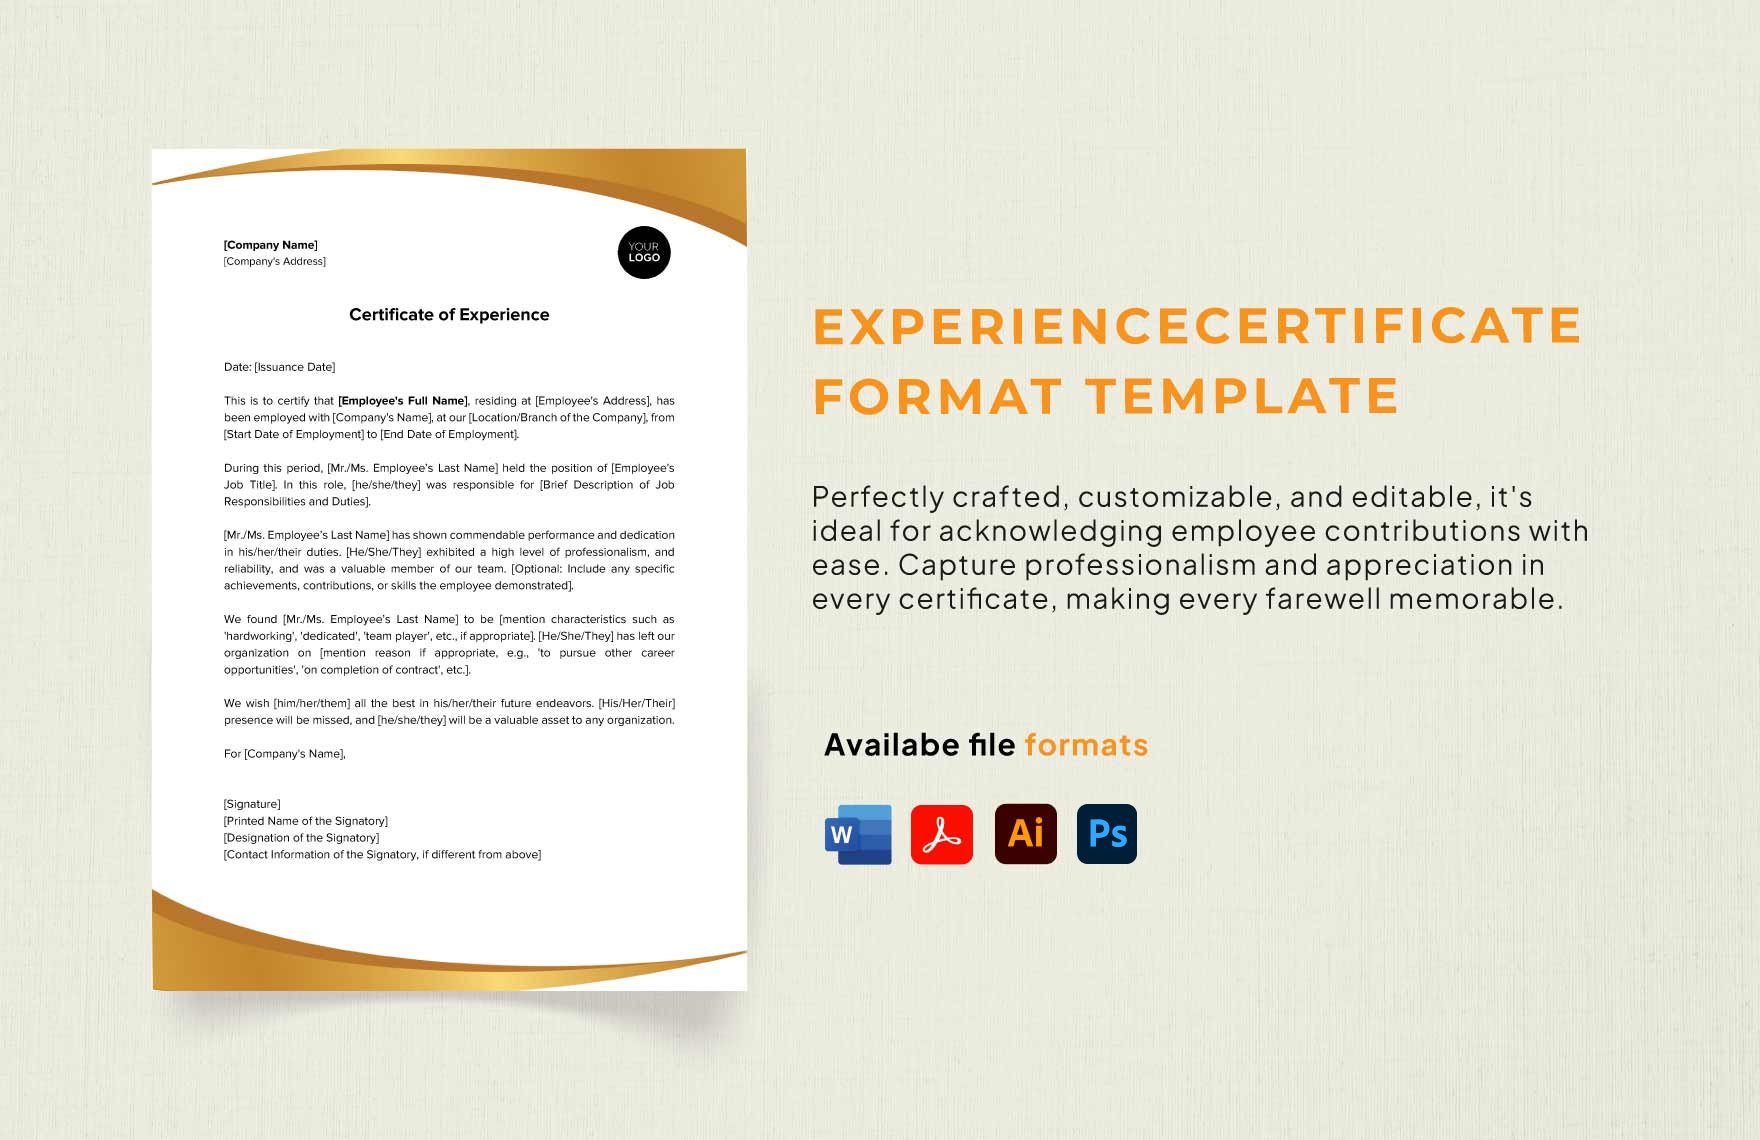 Experience Certificate Format Template